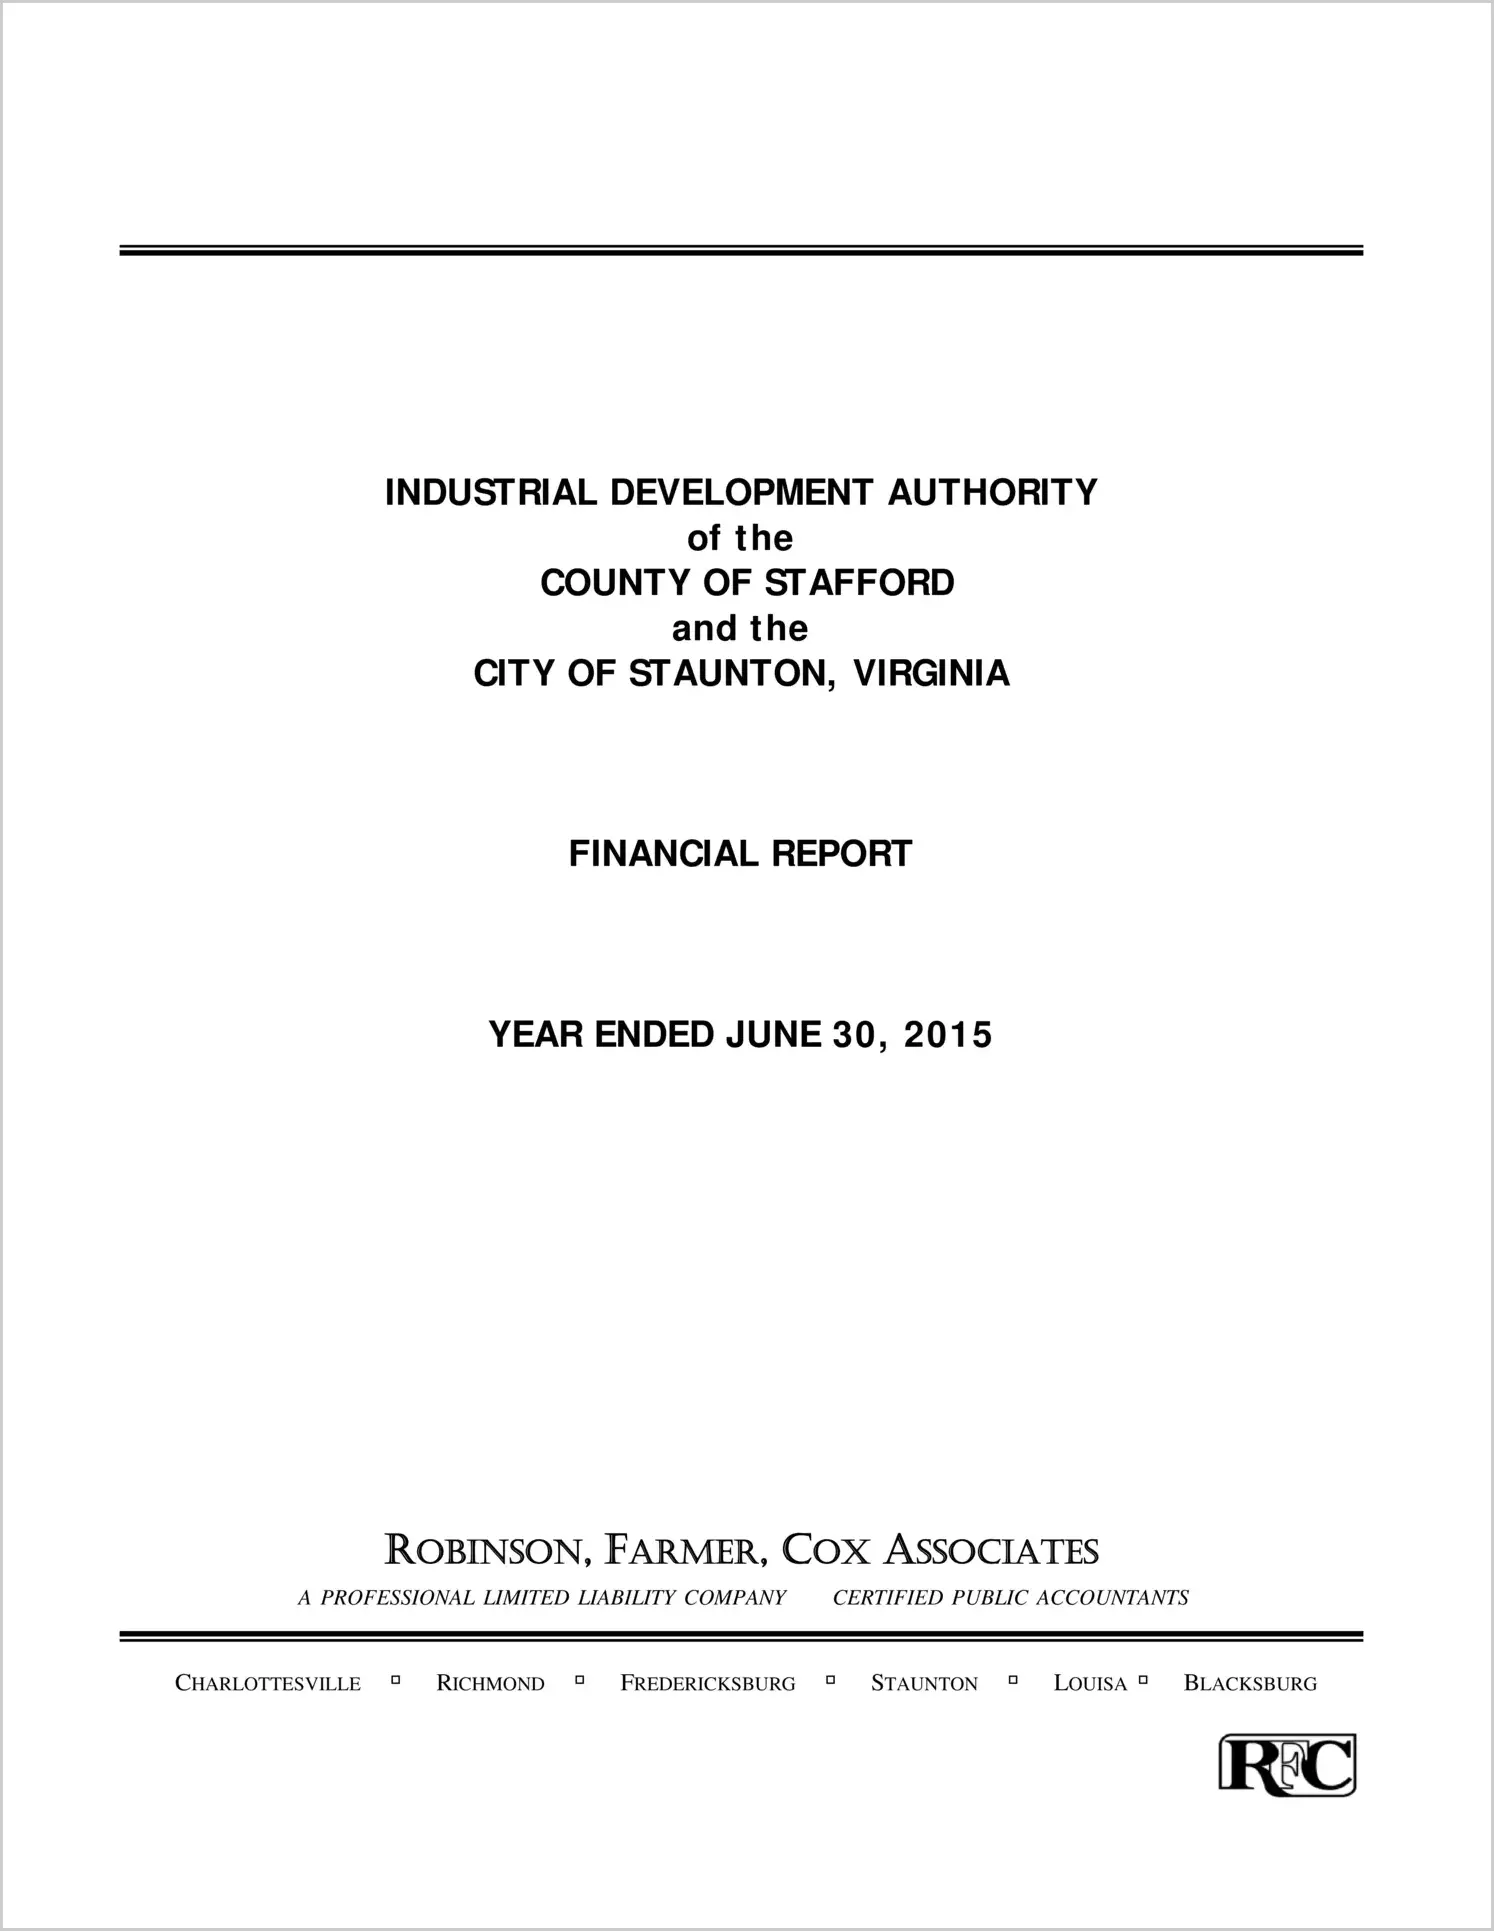 2015 ABC/Other Annual Financial Report  for Stafford-Staunton Industrial Development Authority